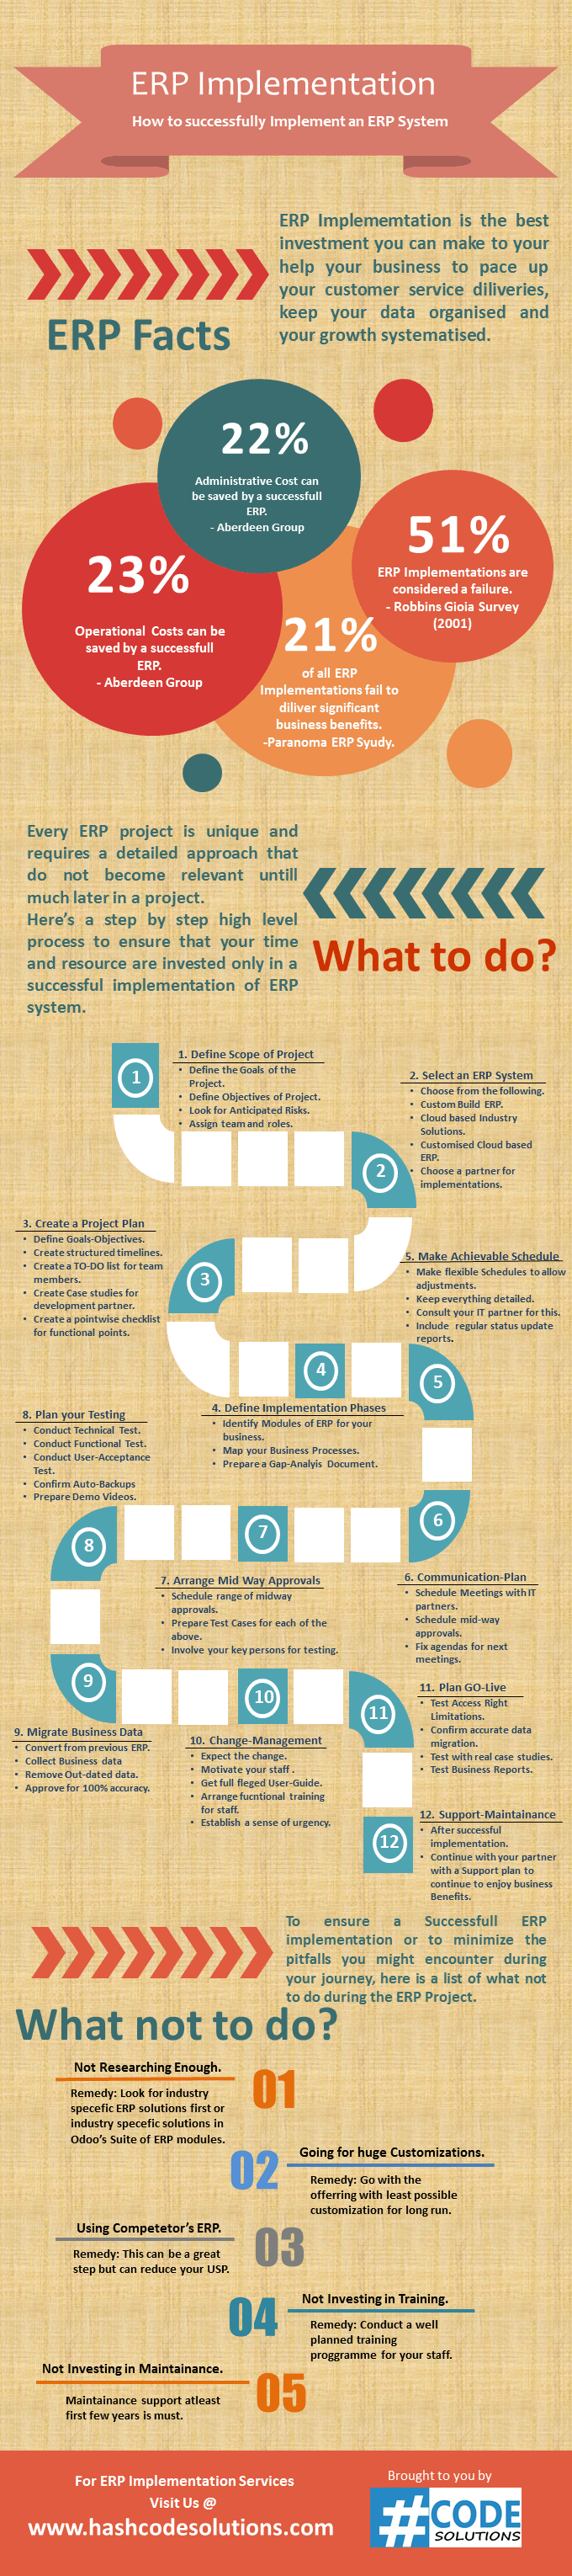 ERP Implementation_Infographic